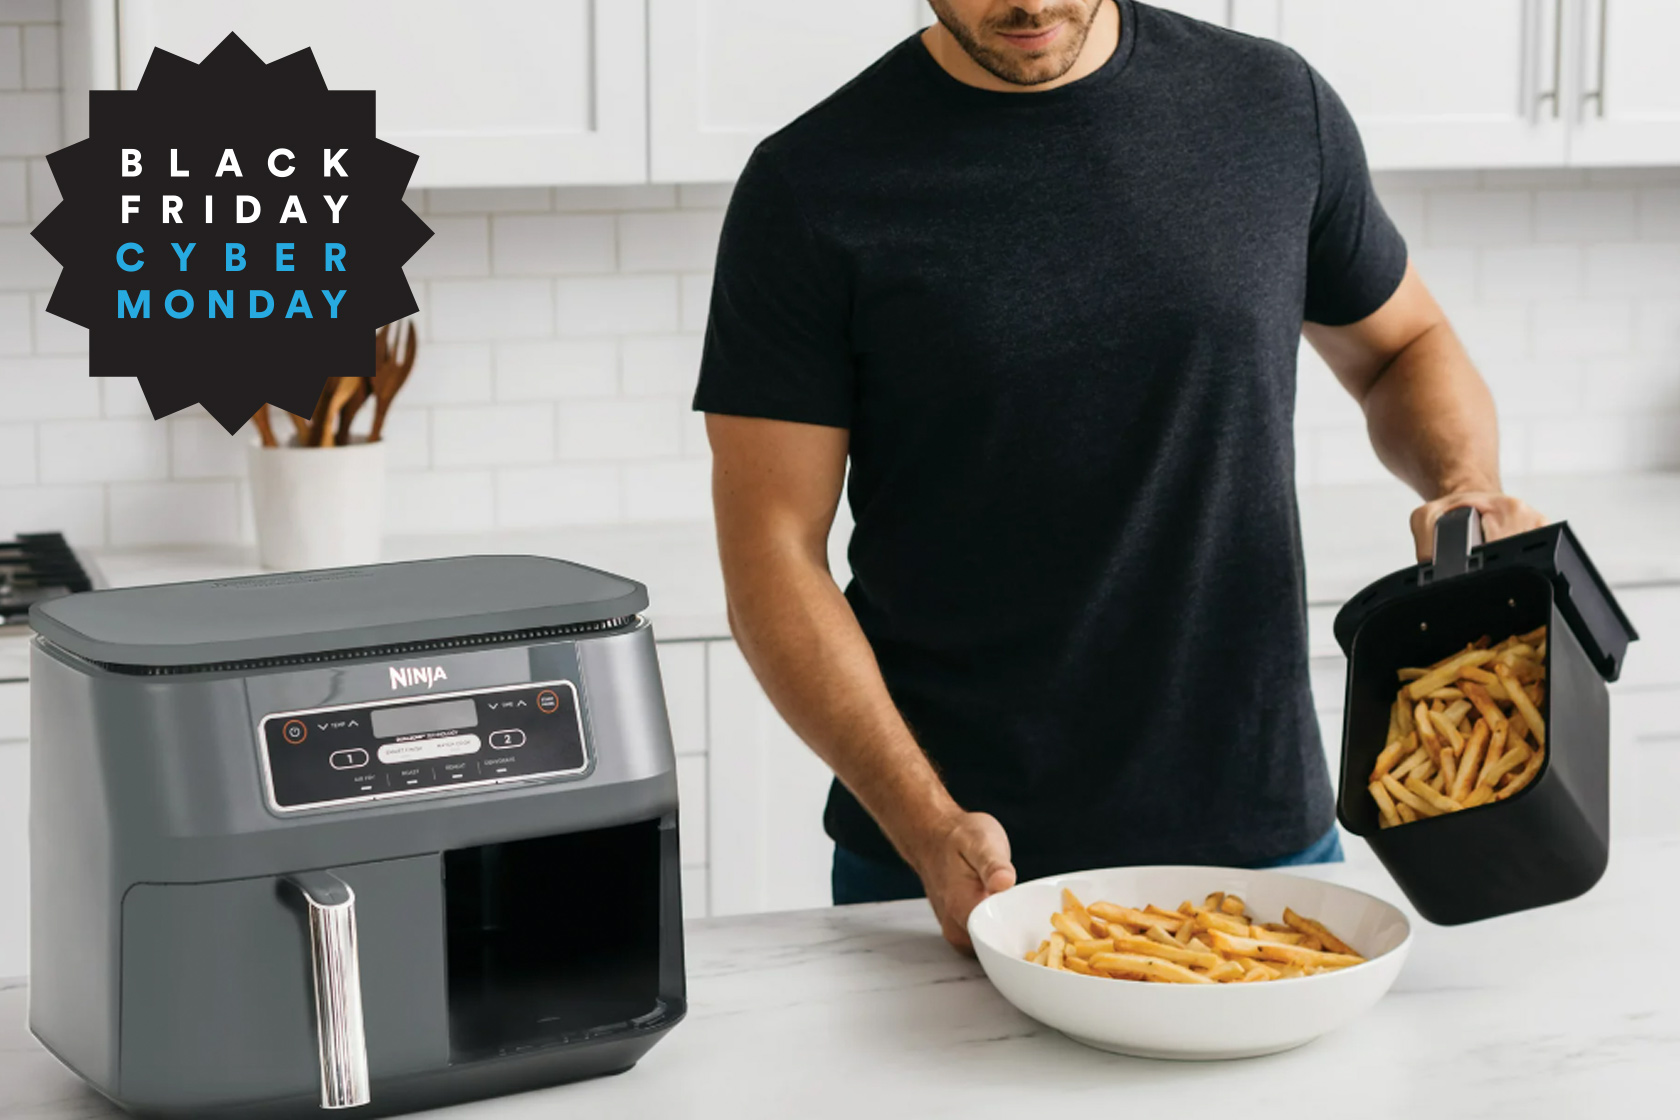 Air fryers on sale ahead of Black Friday at Walmart and